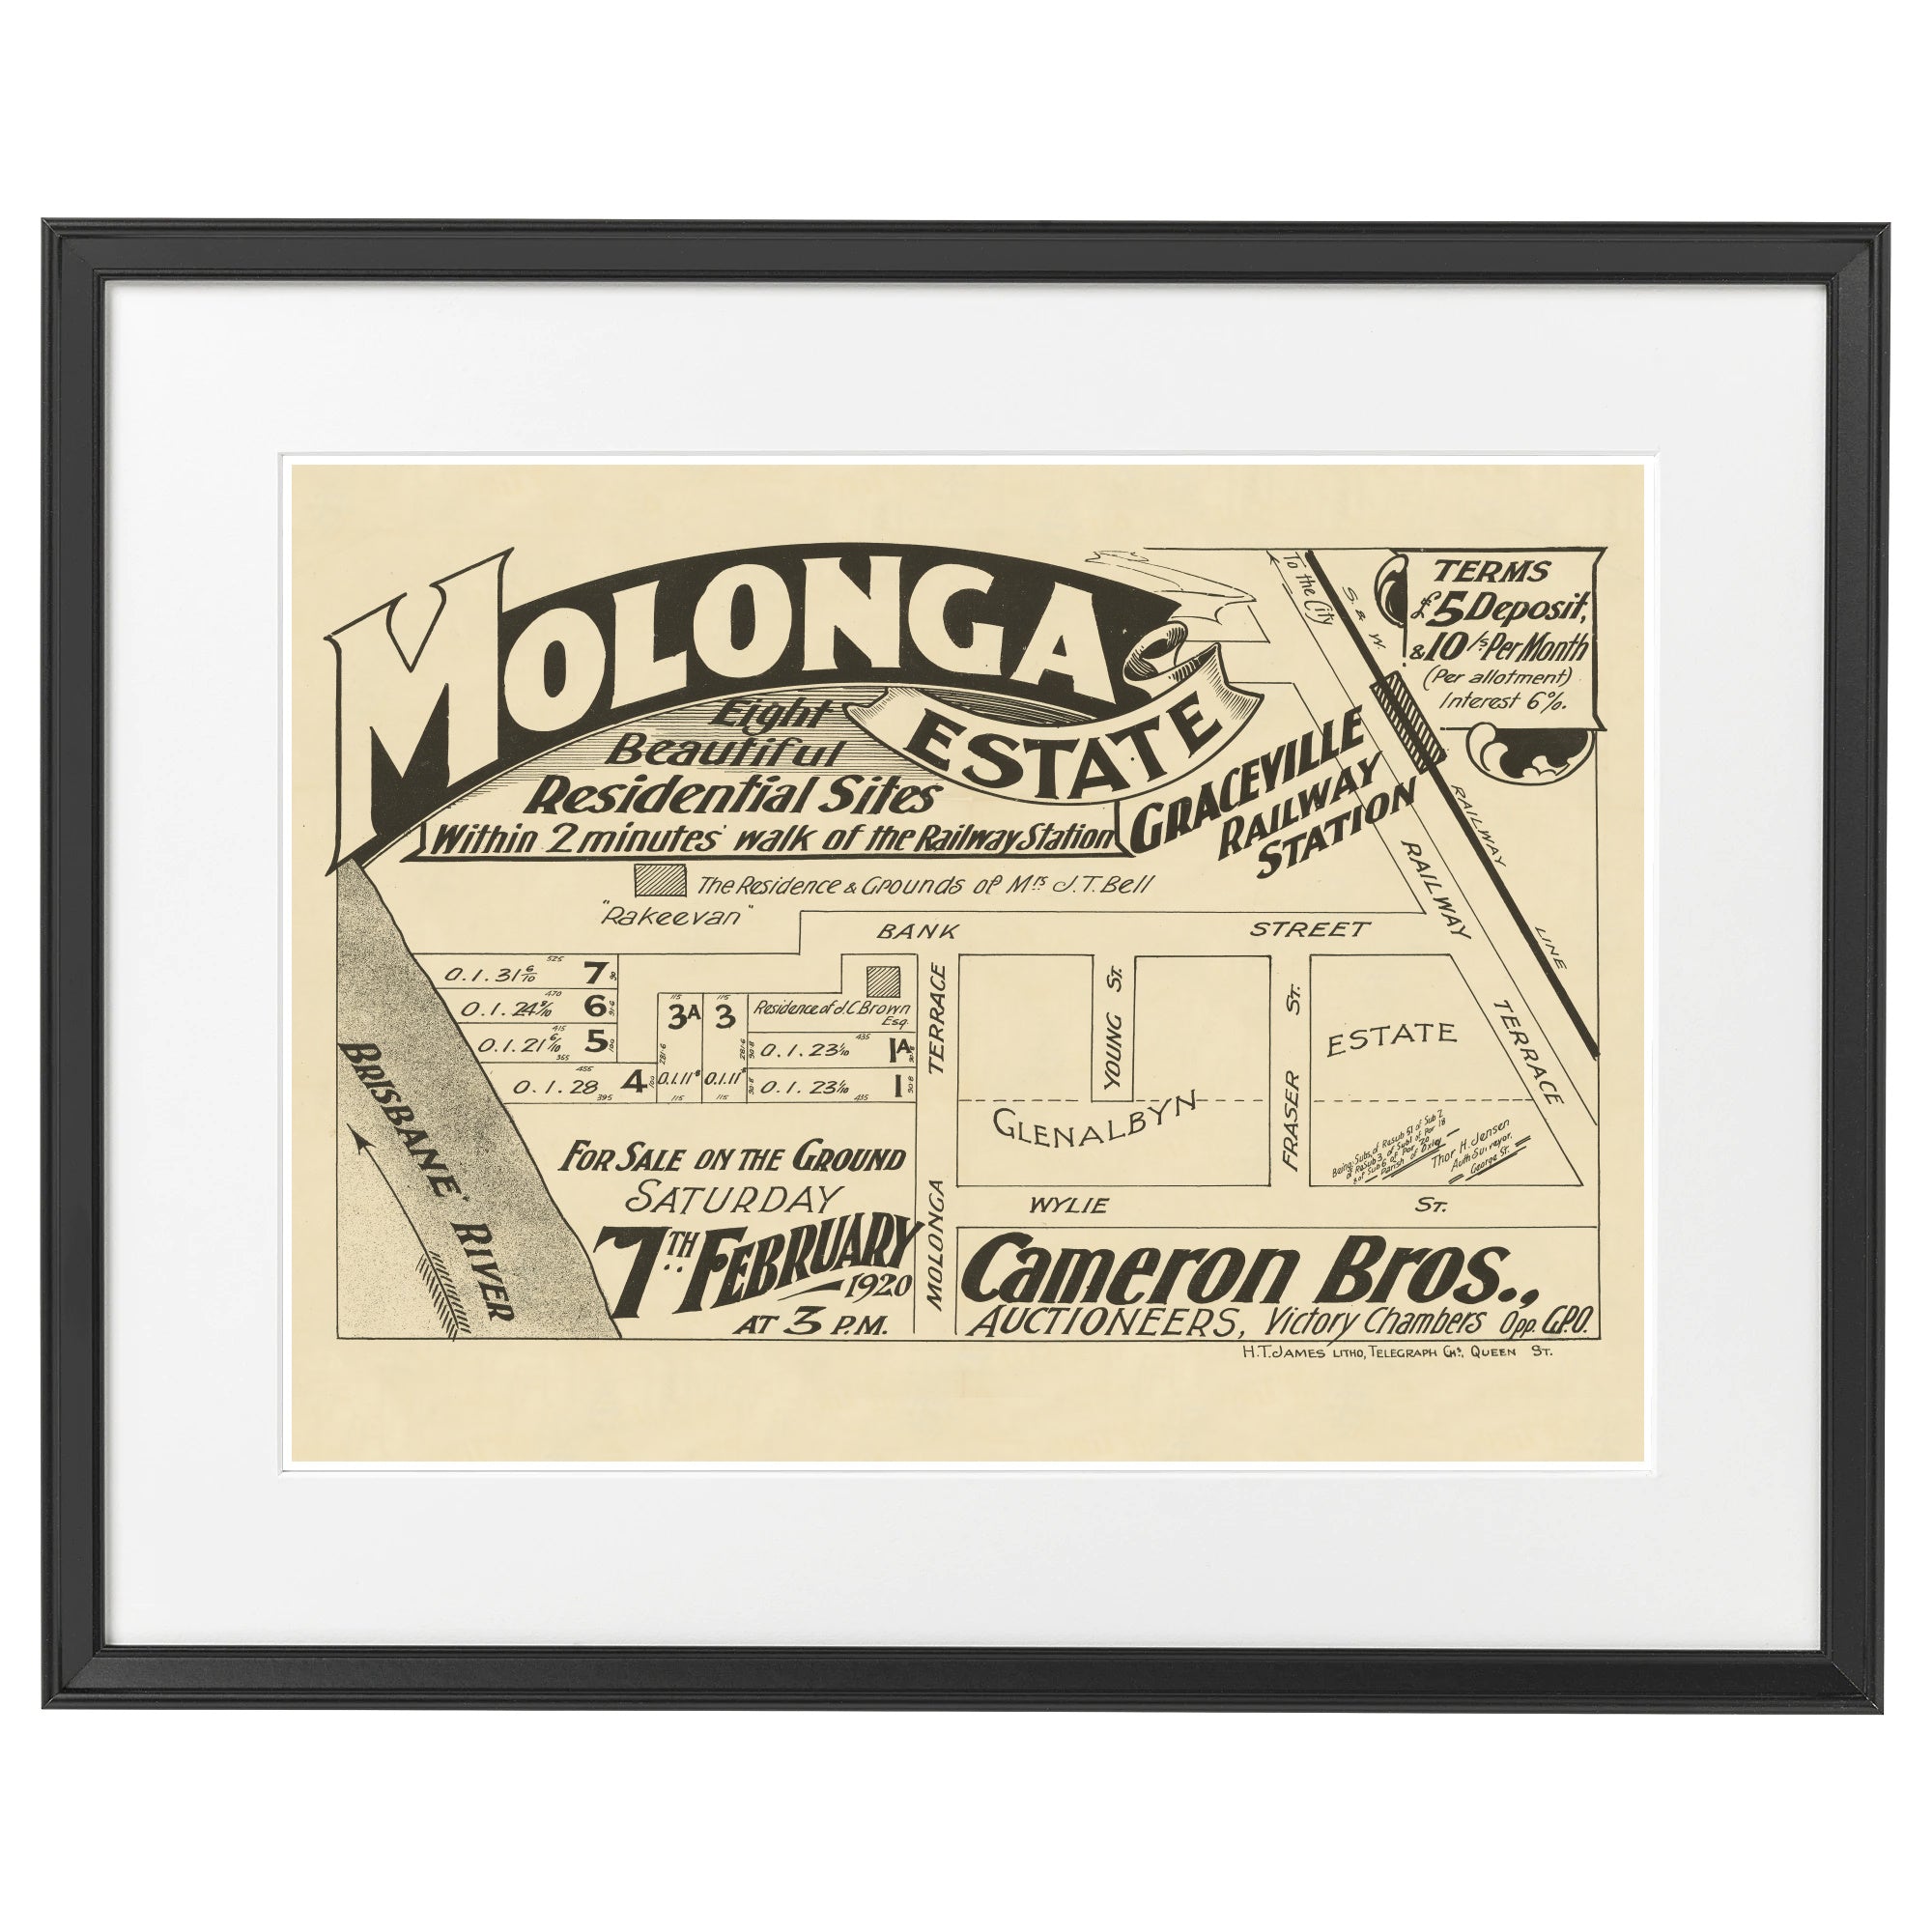 Molonga Estate, Graceville is 101 years old today